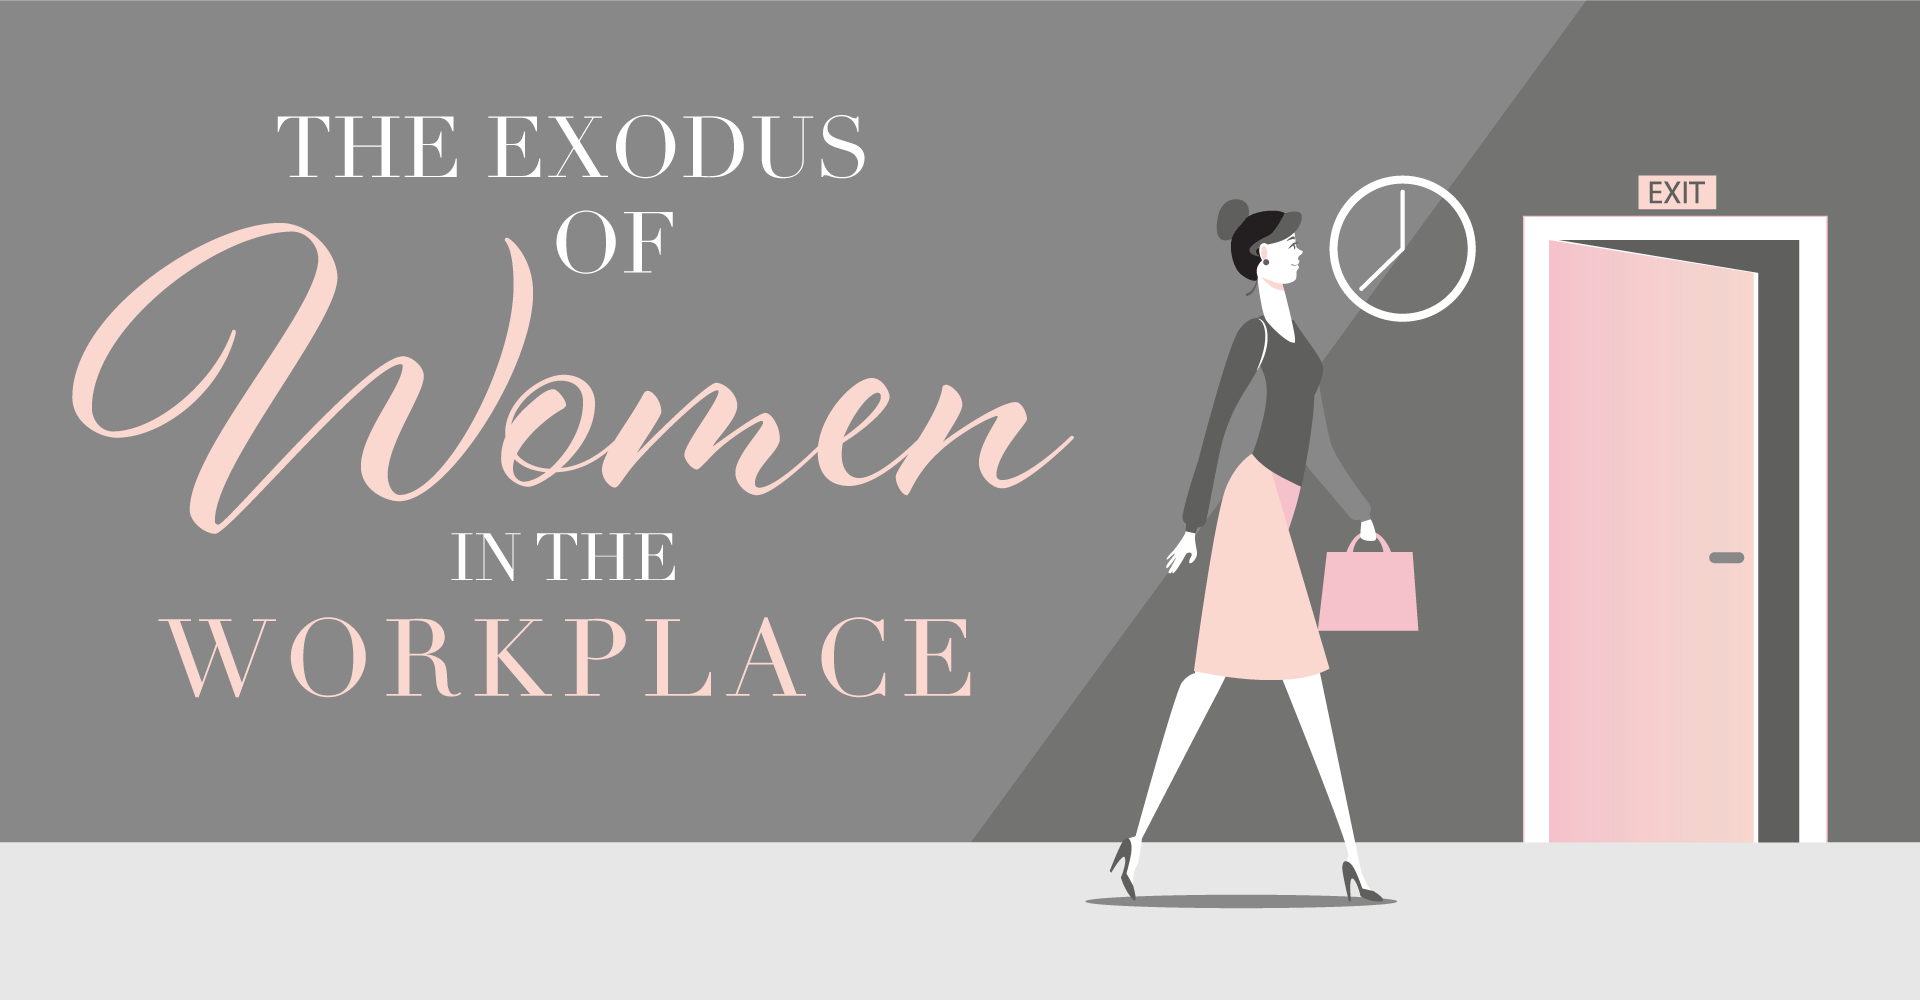 The Exodus of Women in the Workplace